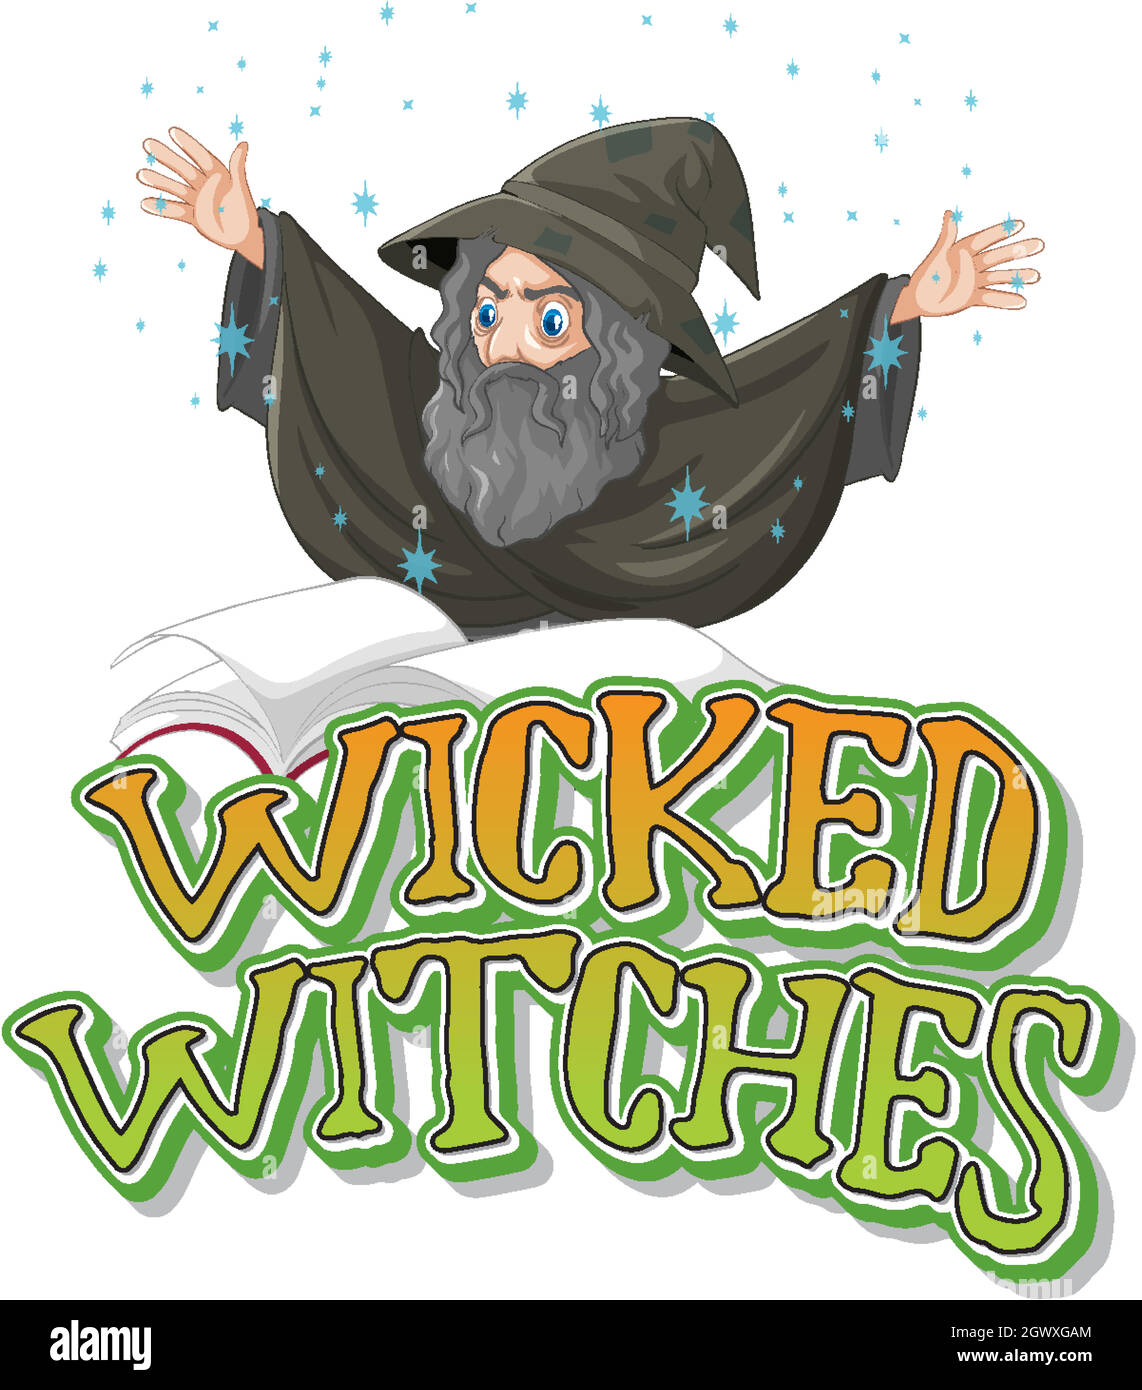 Wicked witches logo on white background Stock Vector